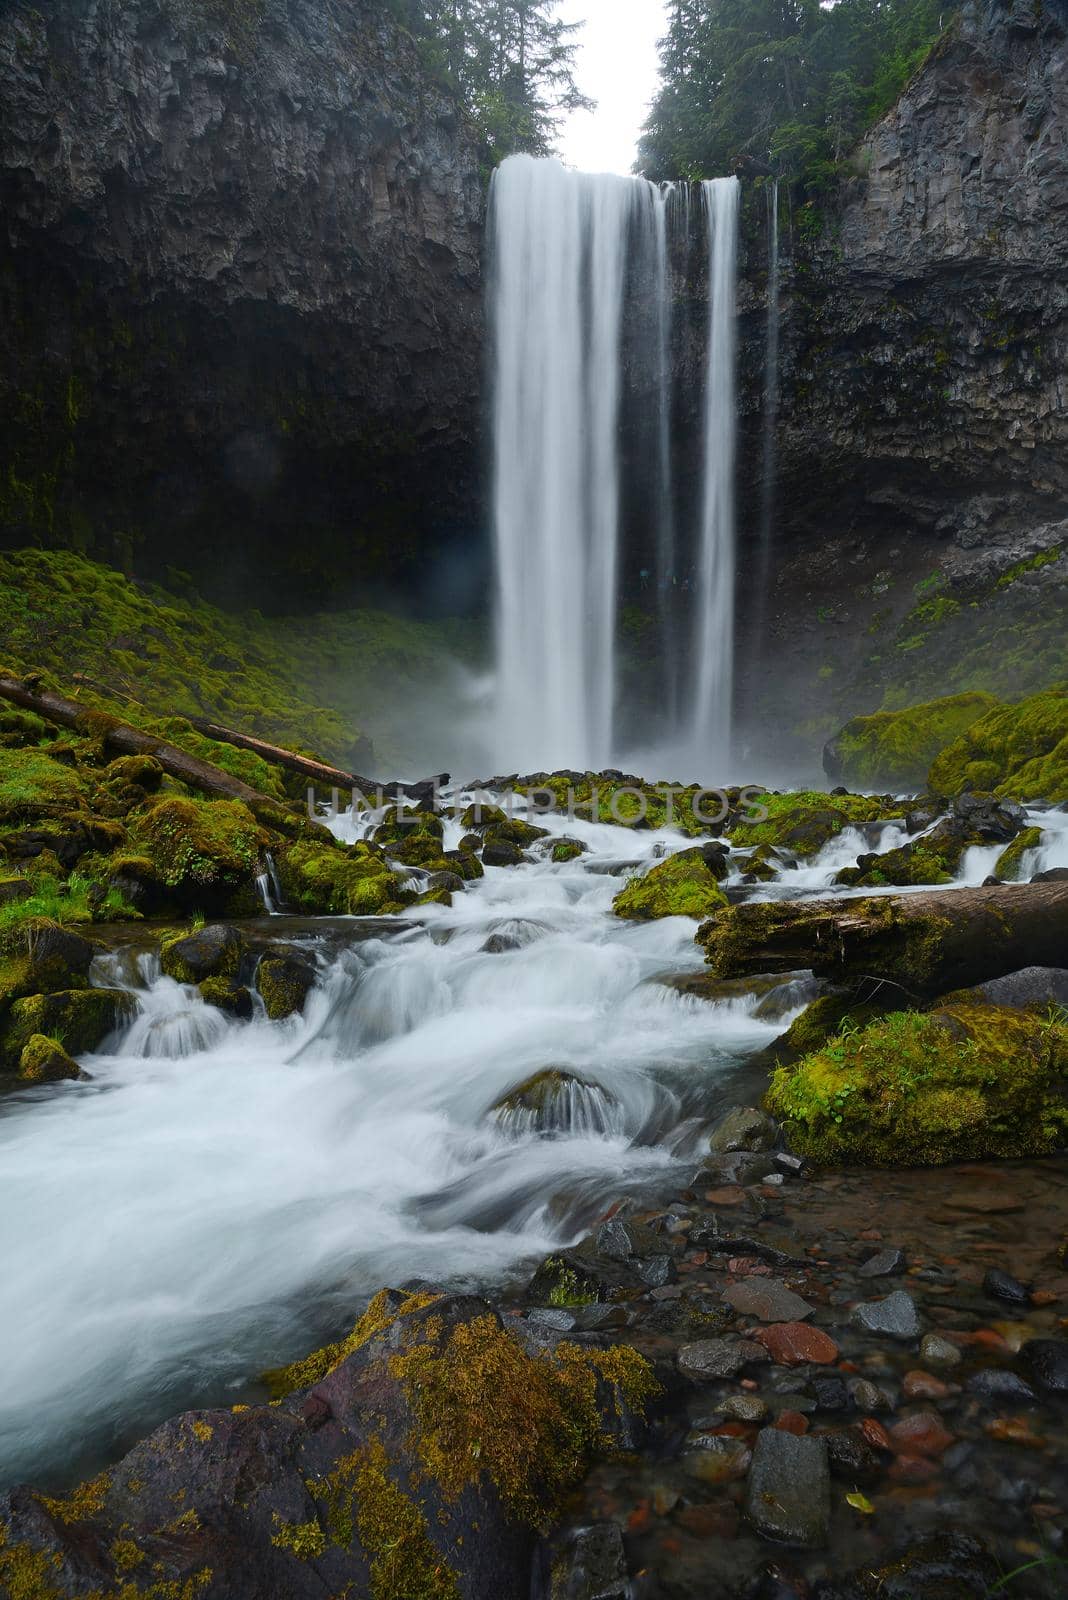 Tamanawas waterfall with mist in oregon